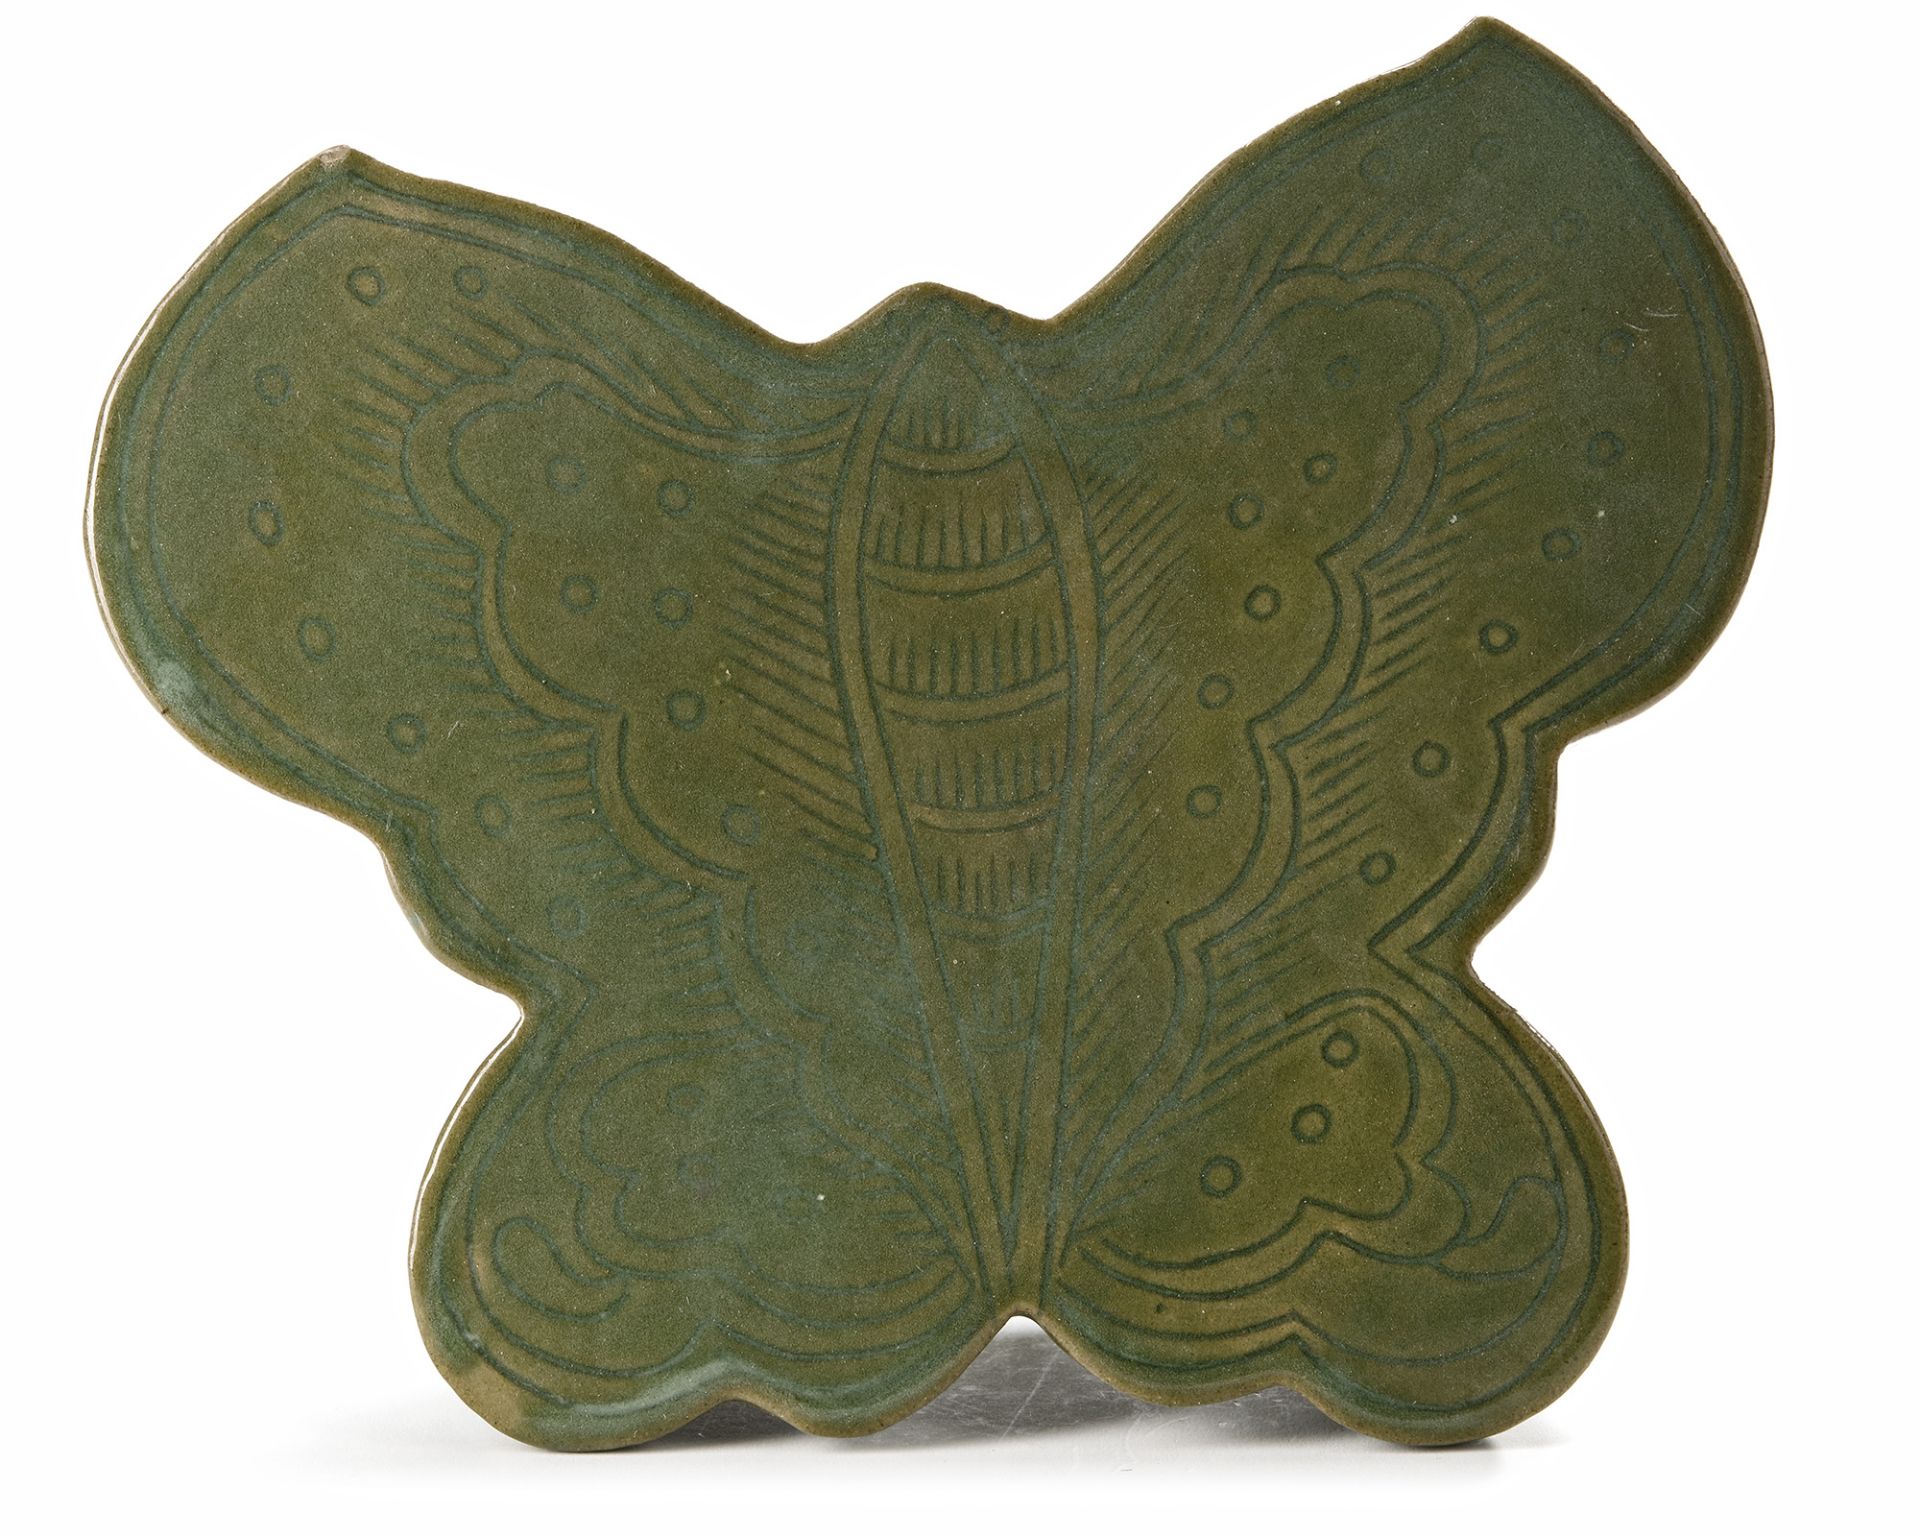 A CHINESE CELADON BUTTERFLY SHAPED PILLOW, MING DYNASTY (1368-1644)